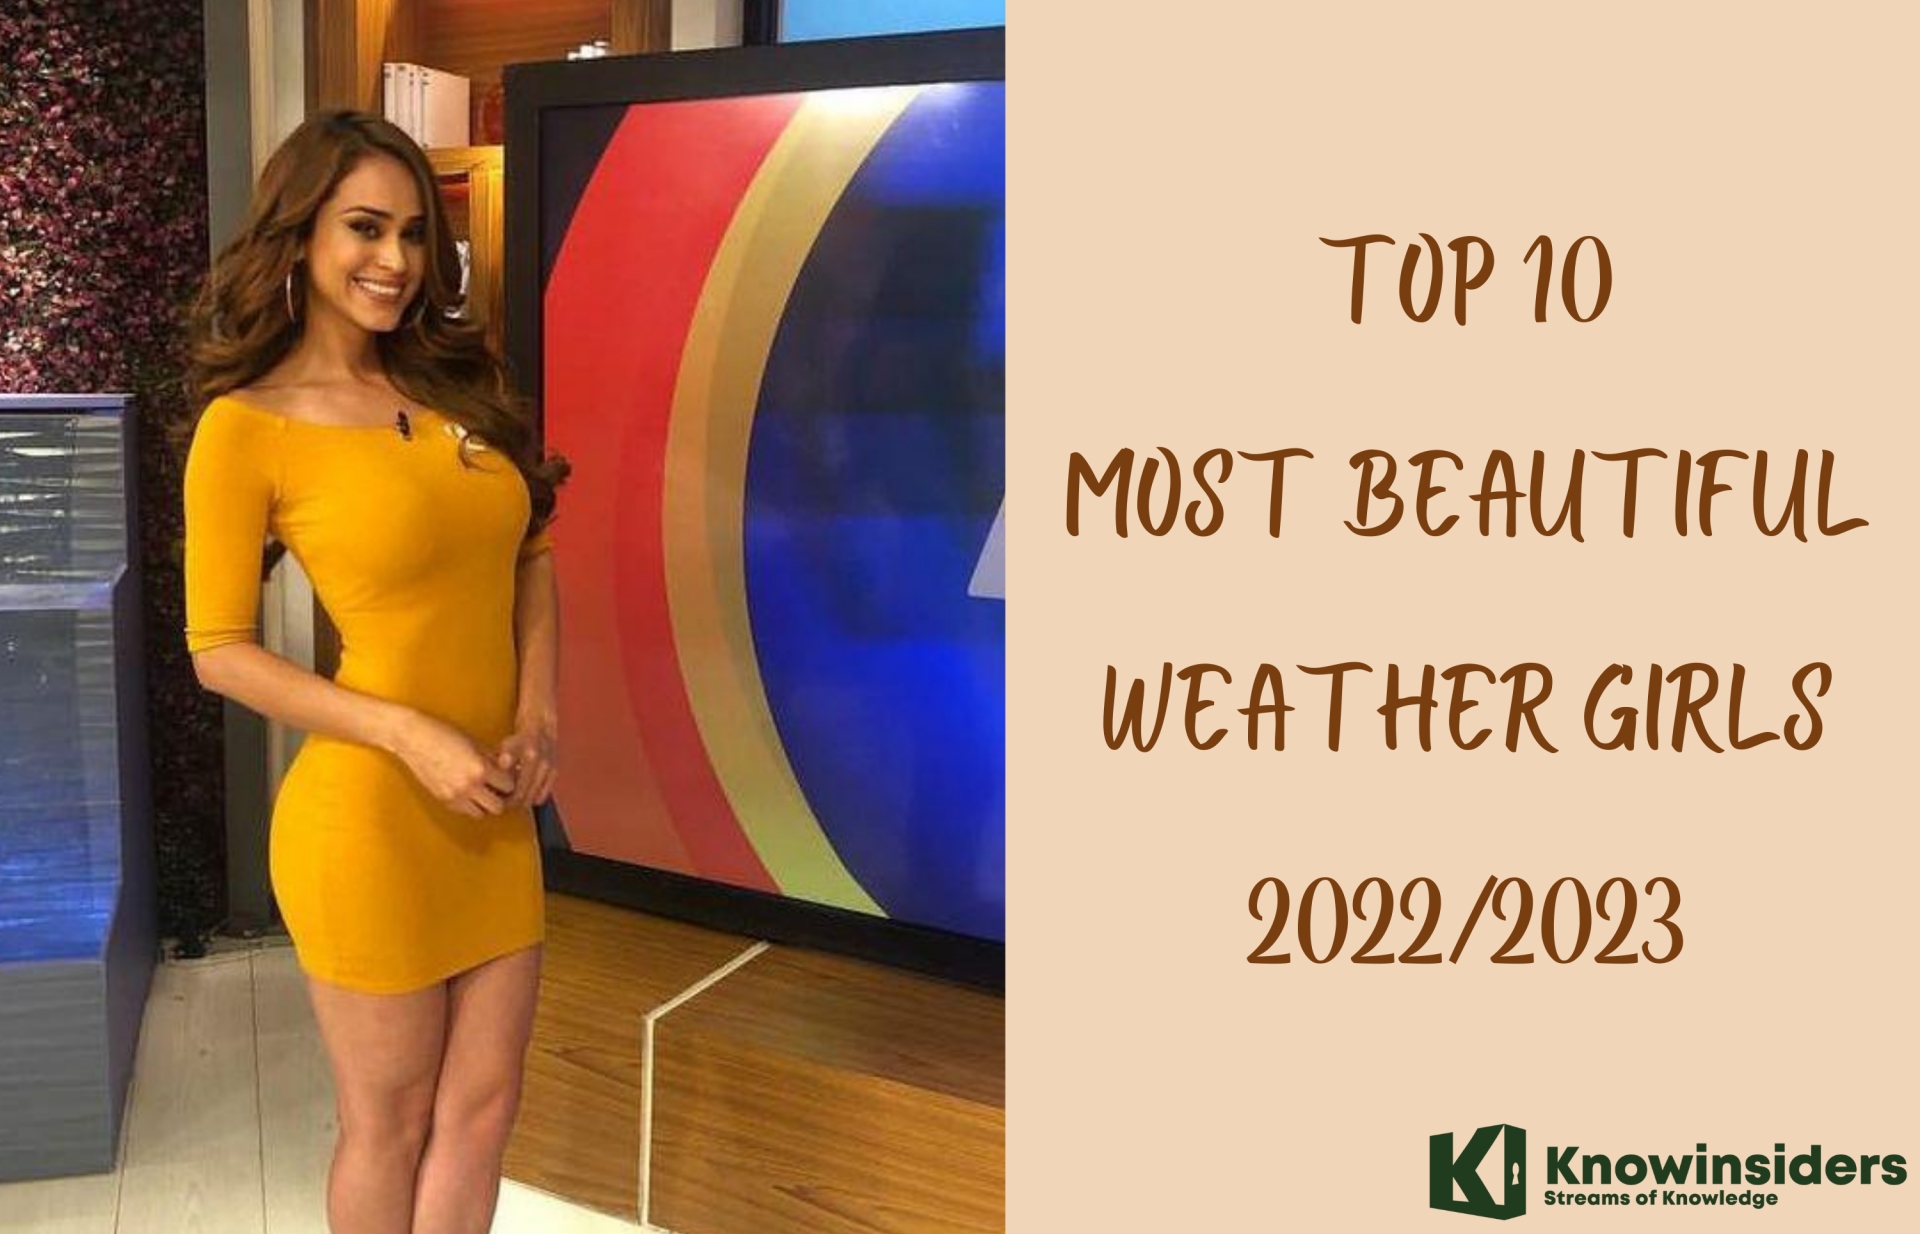 Top 10 Most Beautiful Weather Girls in the US & South America 2023